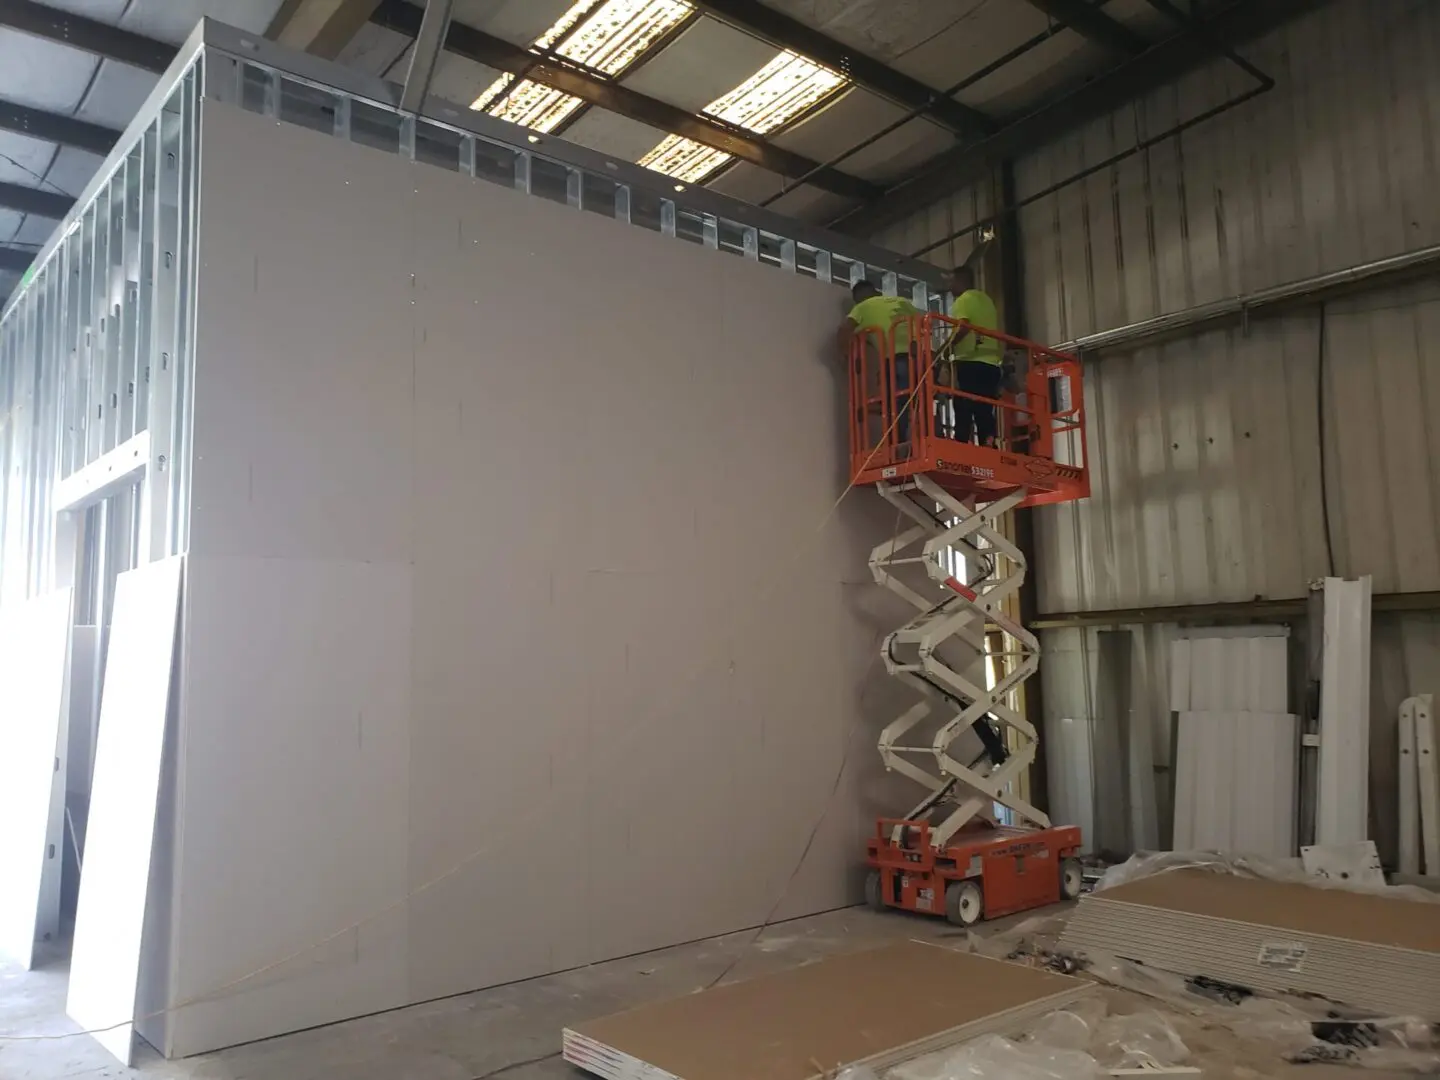 A man on a scissor lift painting the wall.